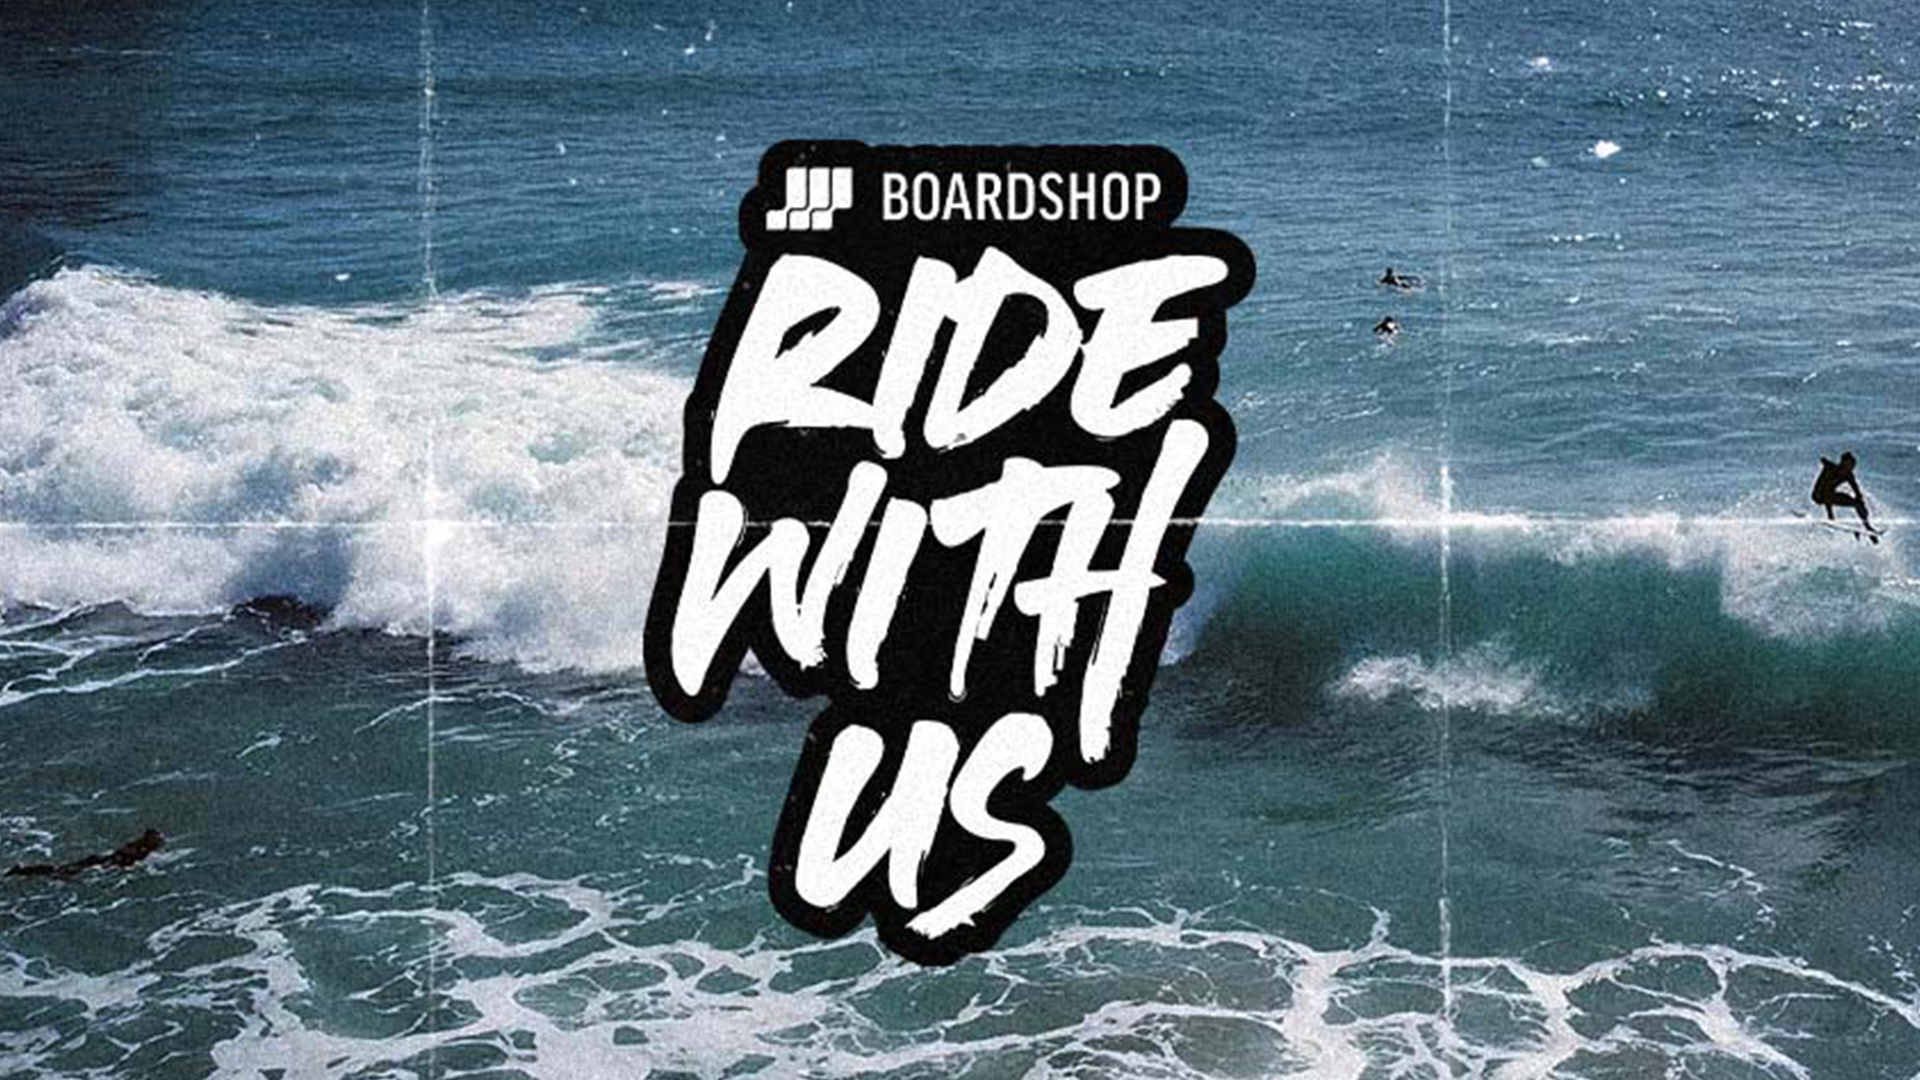 The Ride With Us Project